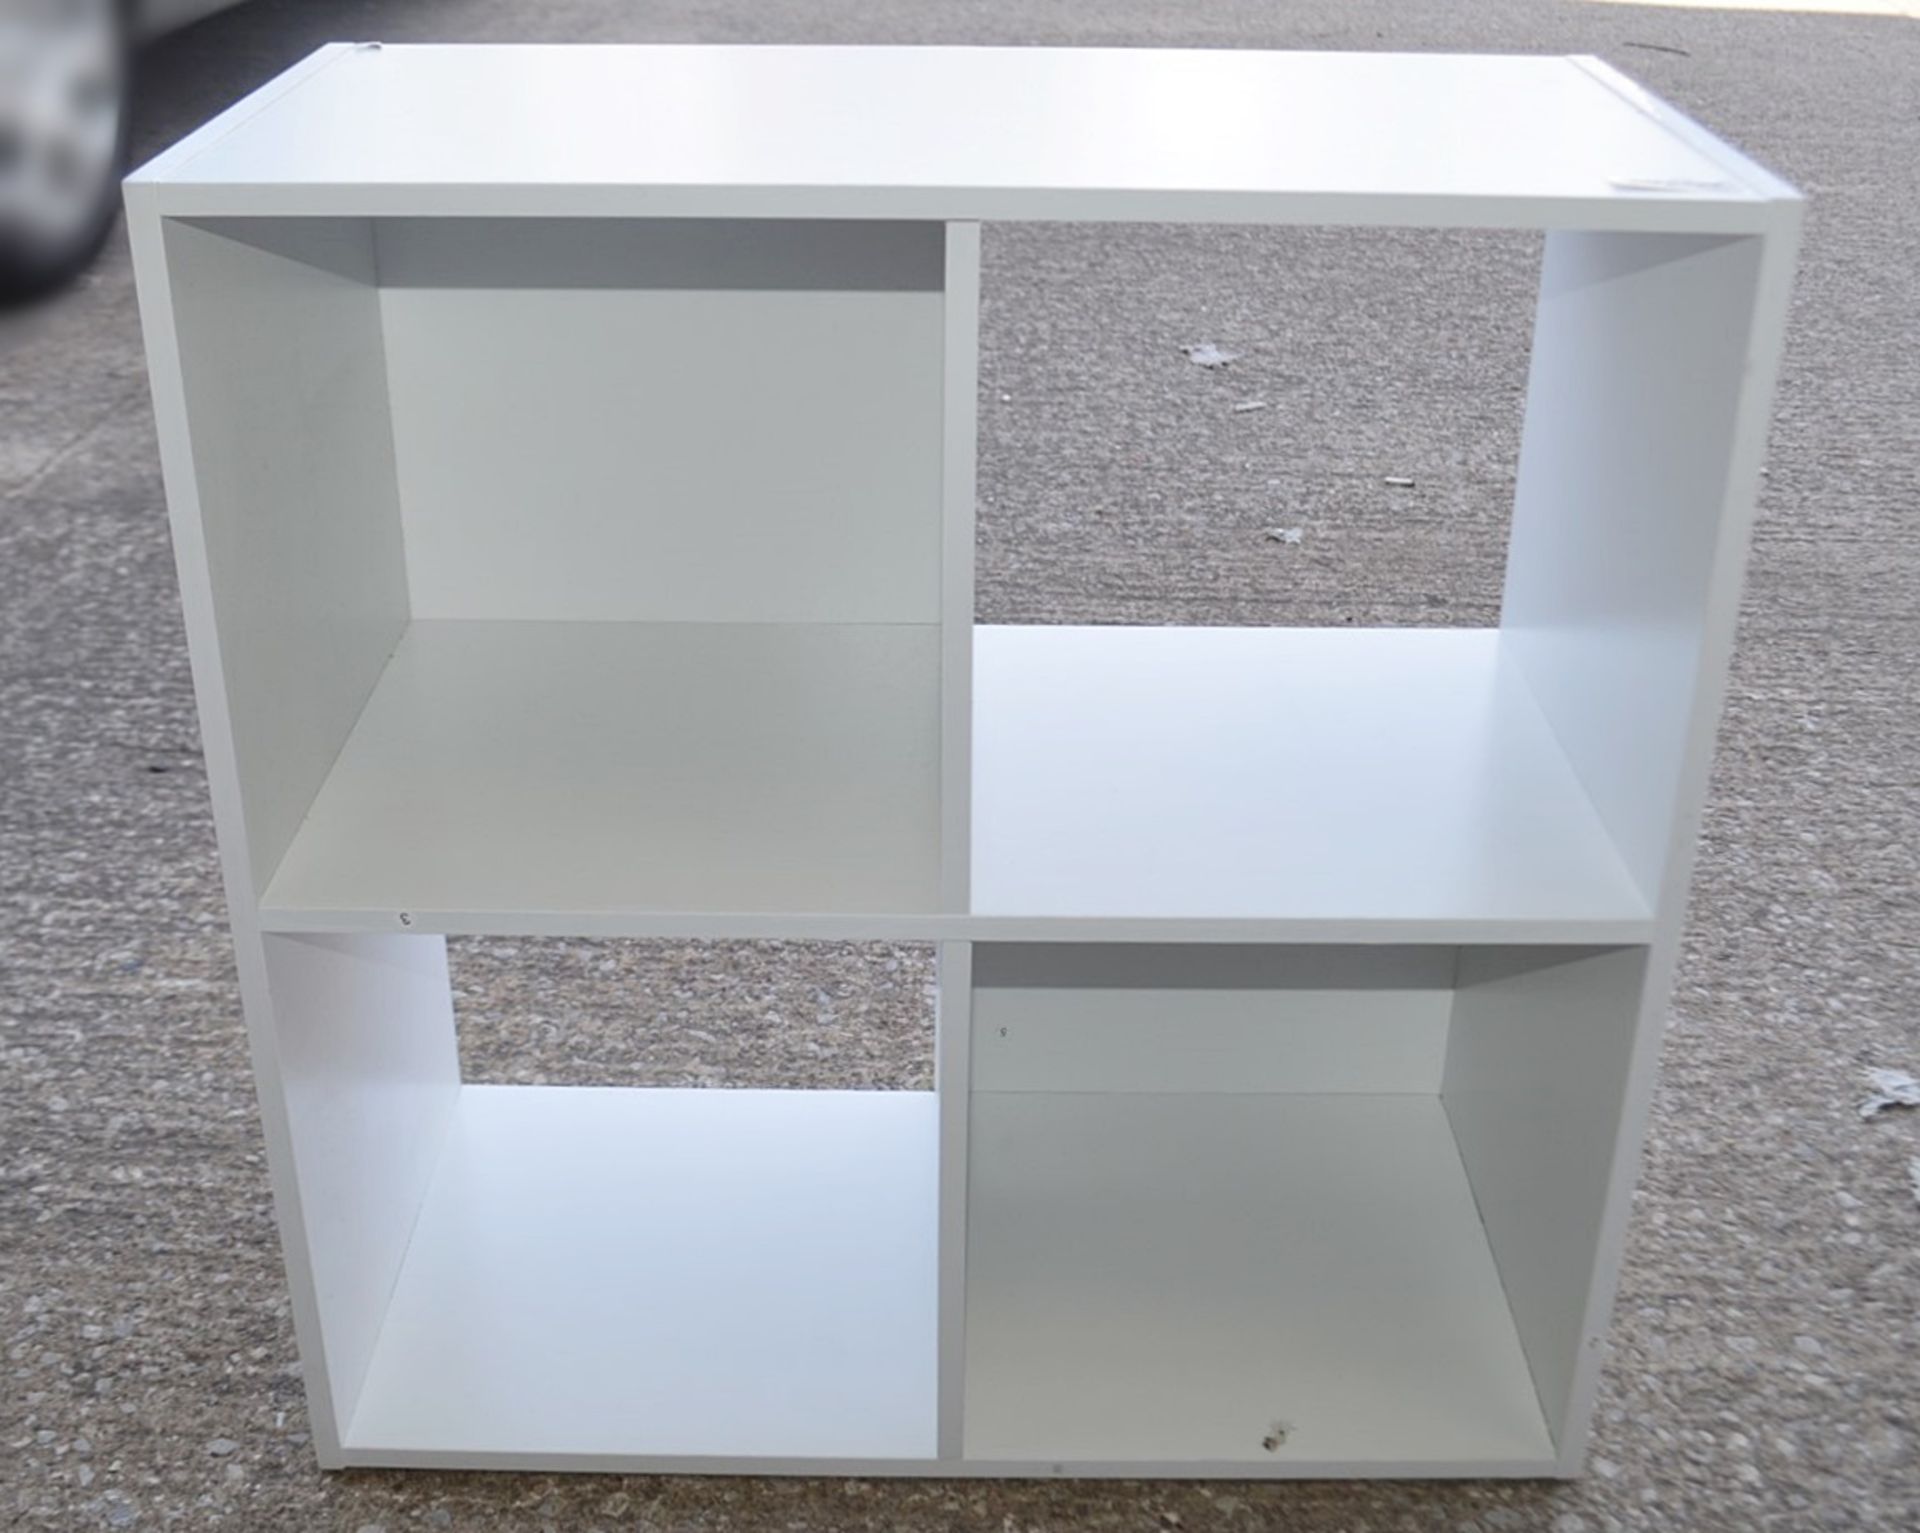 1 x Square Storage Unit With 4-Compartments In White - Preowned, From An Exclusive Property - - Image 2 of 3